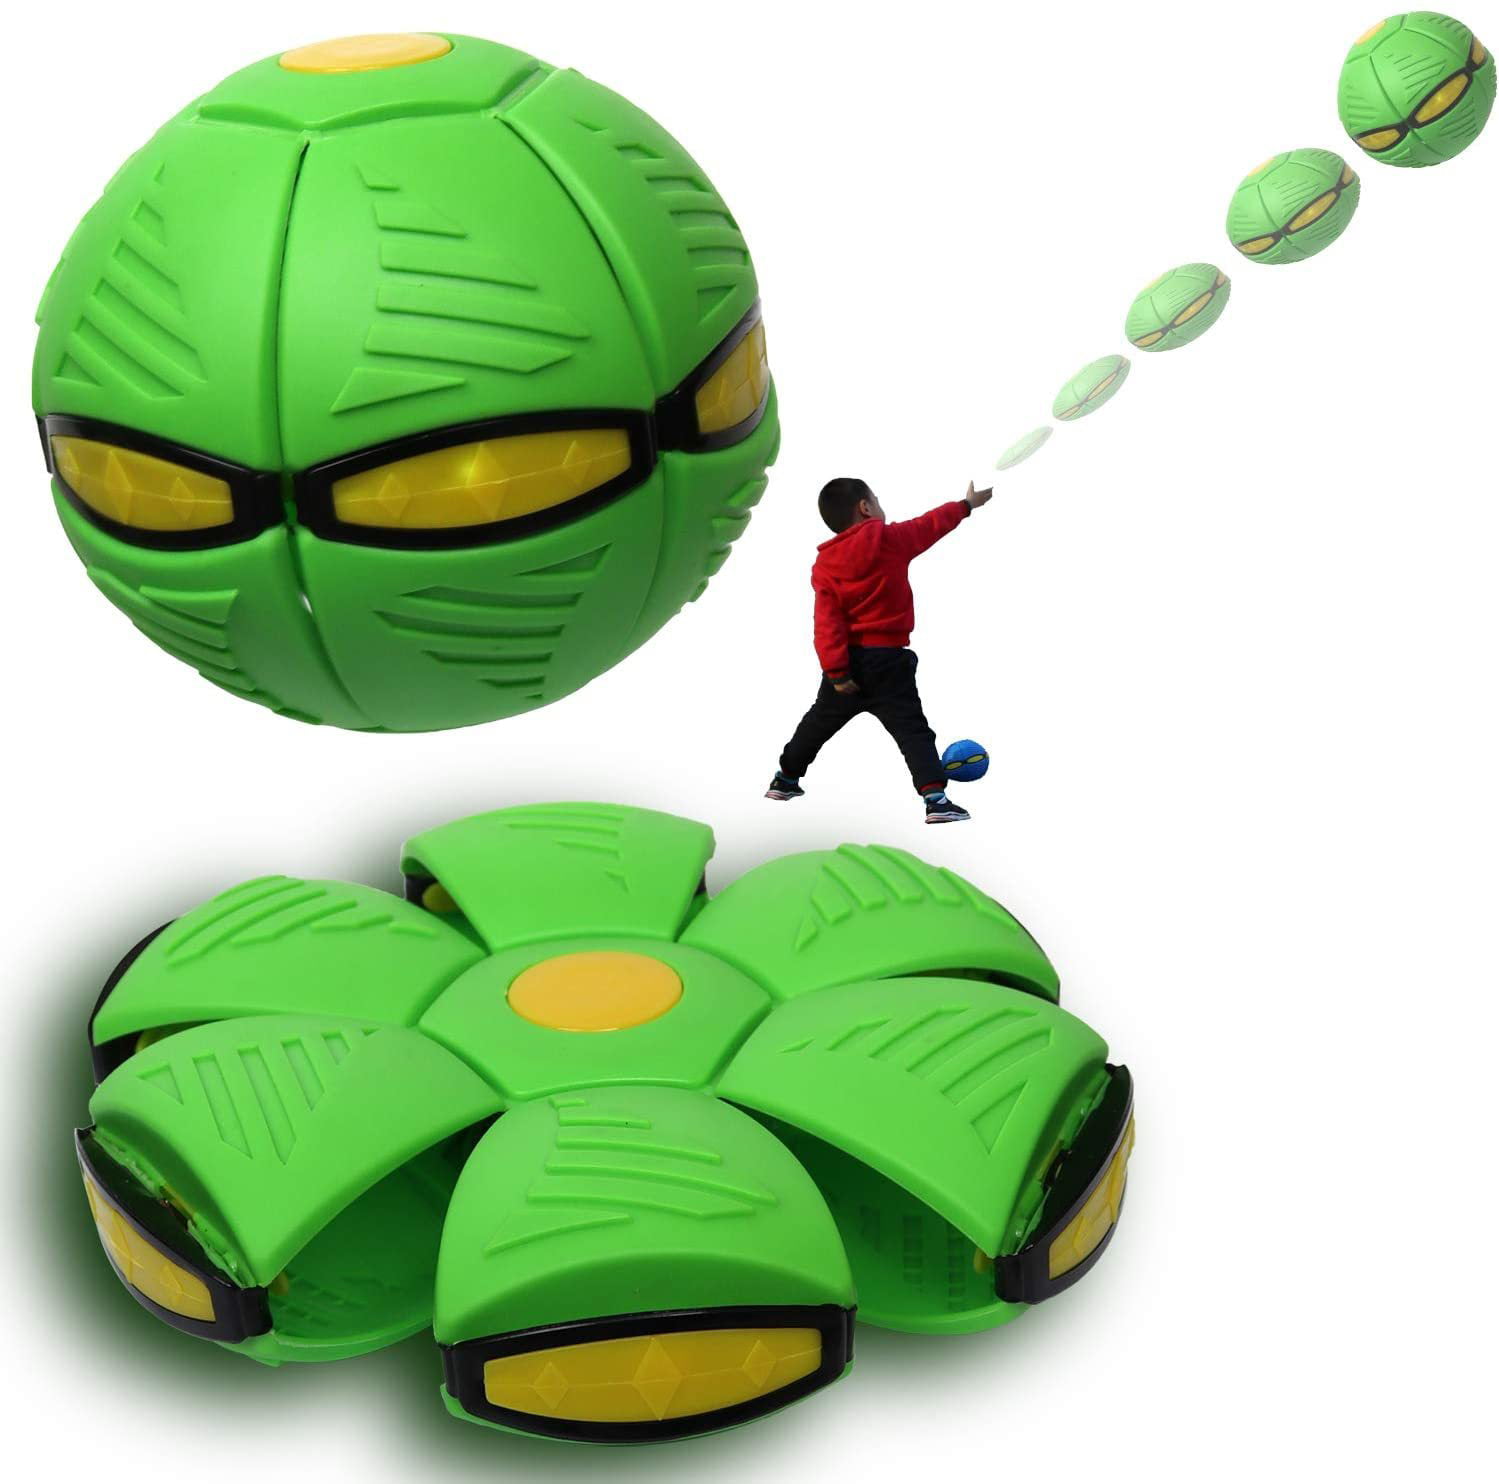 UFO Magic Ball/Deformed Flying Saucer Ball,Vent Ball Toy Magic UFO Ball with LED Light Flying Ball Vent Ball Venting Decompression Parent-Child Toy 